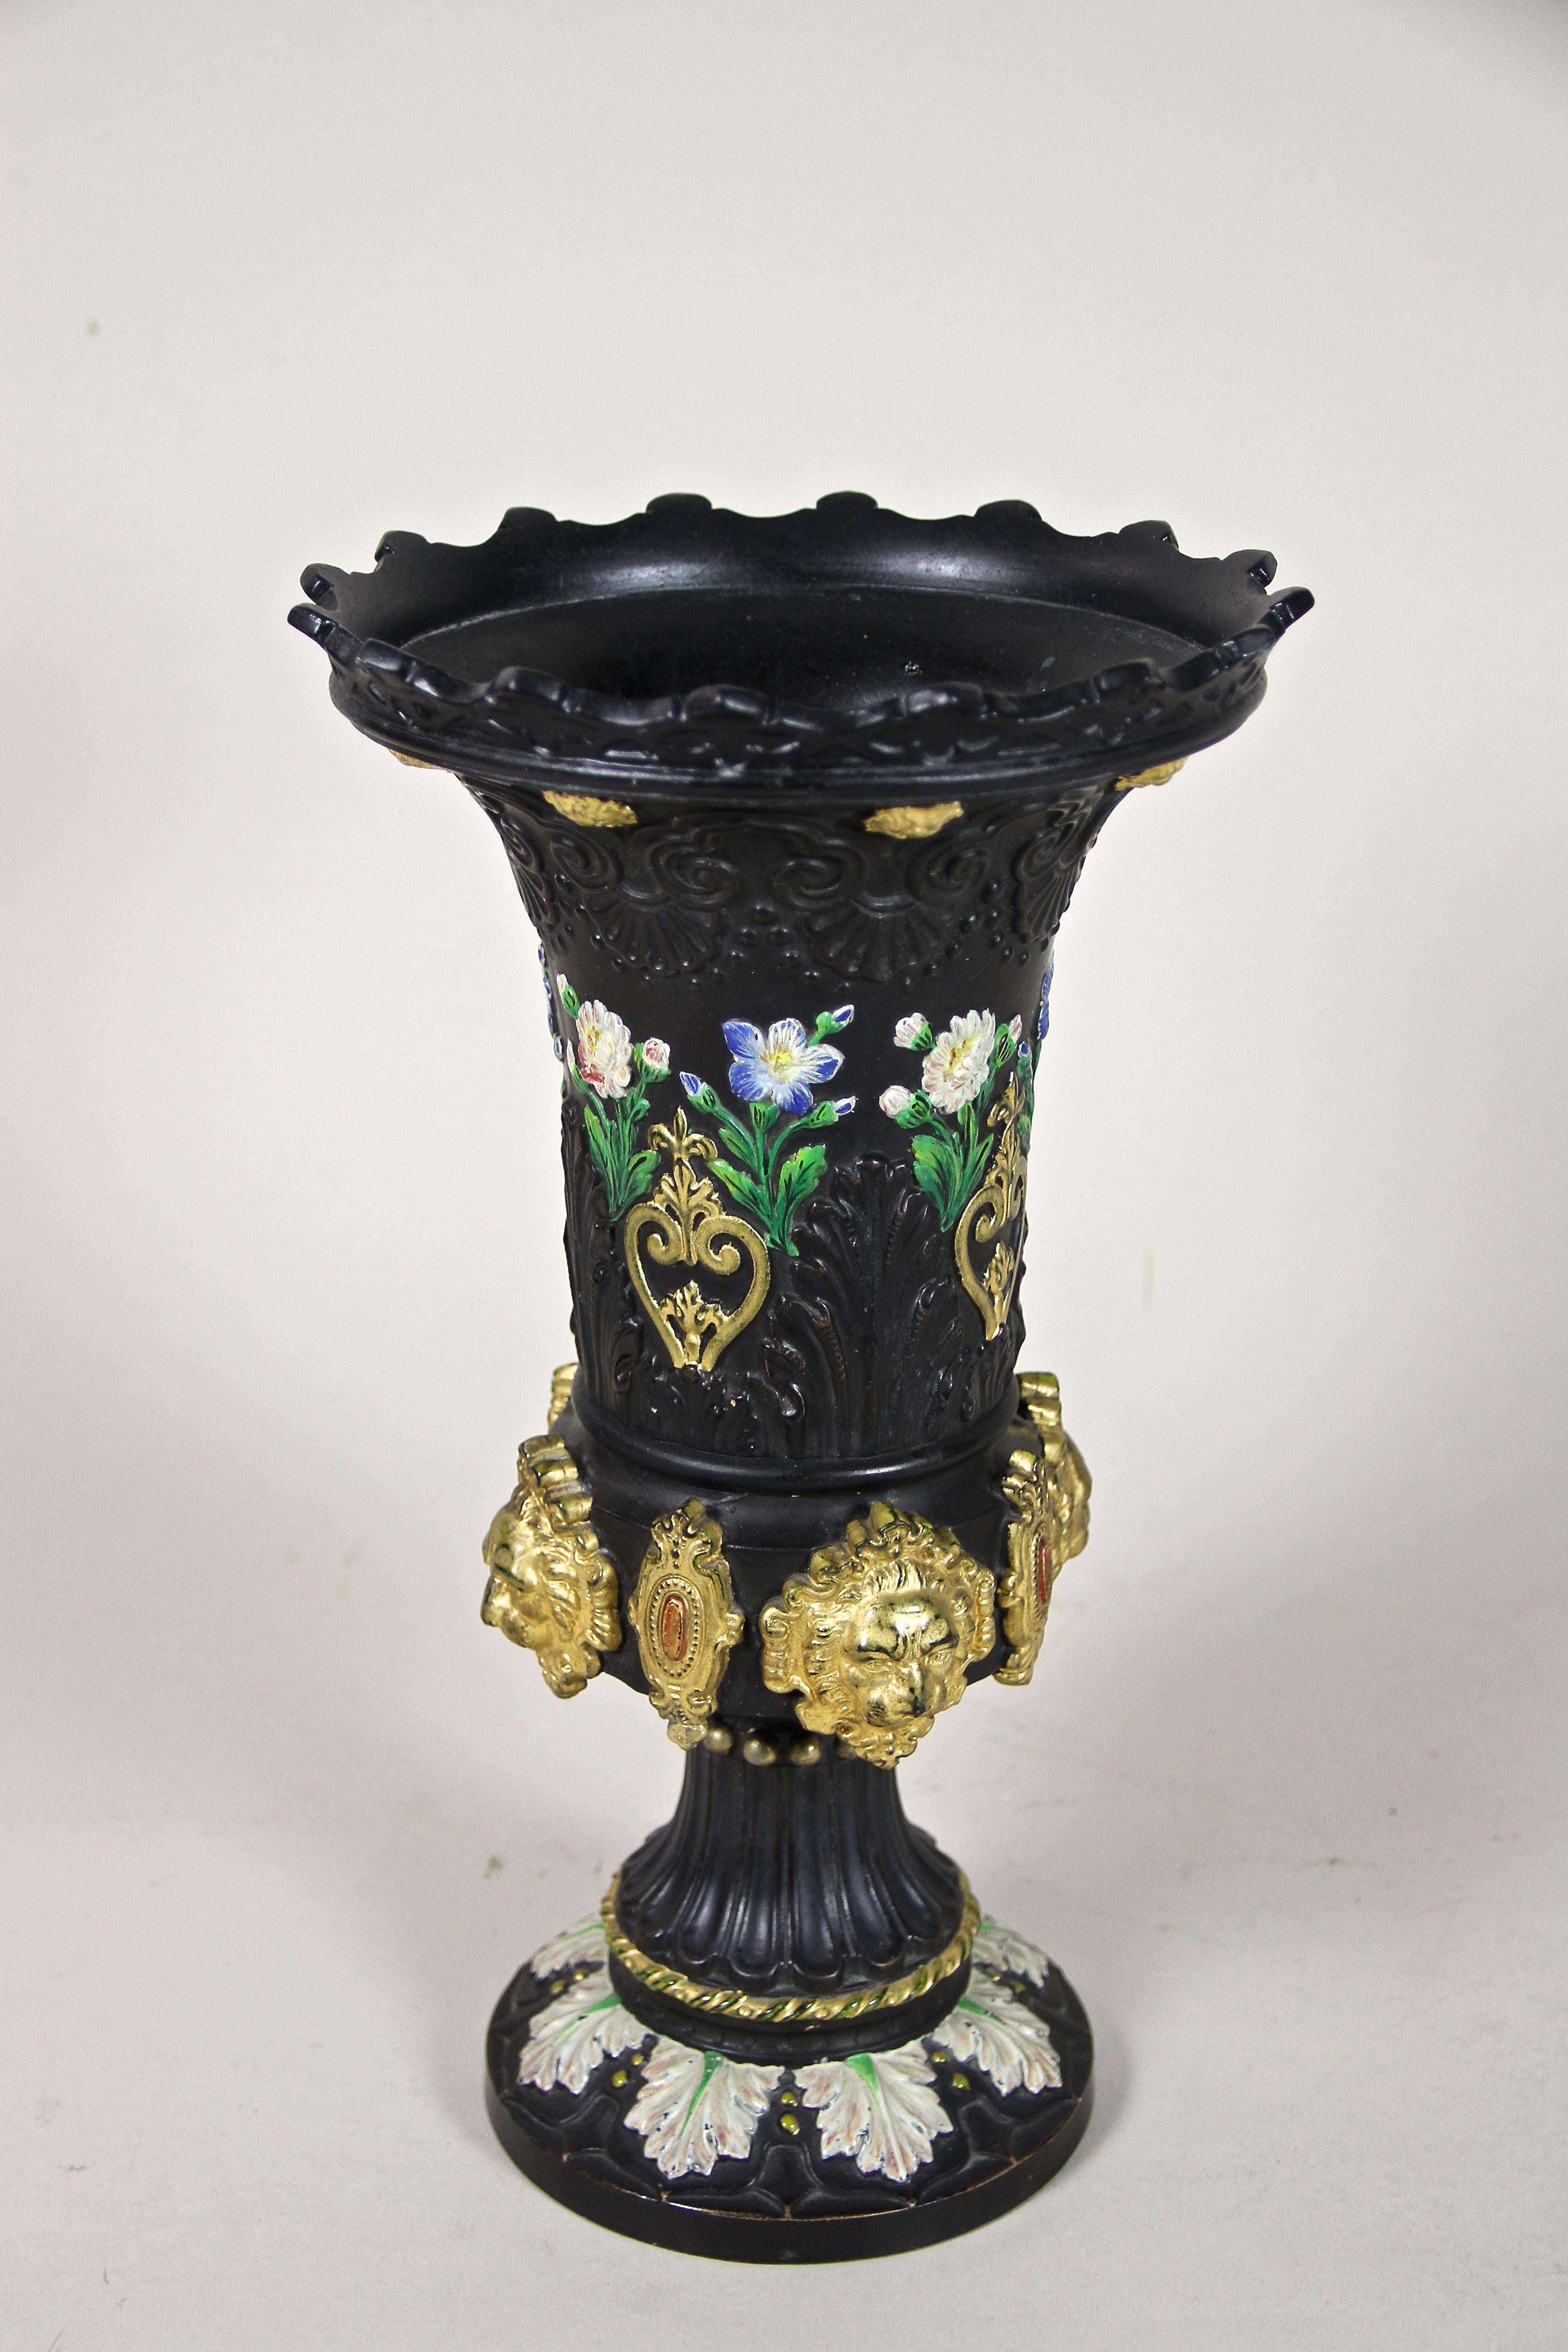 Rare black Majolica Vase with gilt Lion Heads out of the renown workshops of Wilhelm Schiller & Son in Bohemia around 1875. An extraordinary piece of majolica art from the late 19th century, impressing with a goblin-shaped black body adorned by